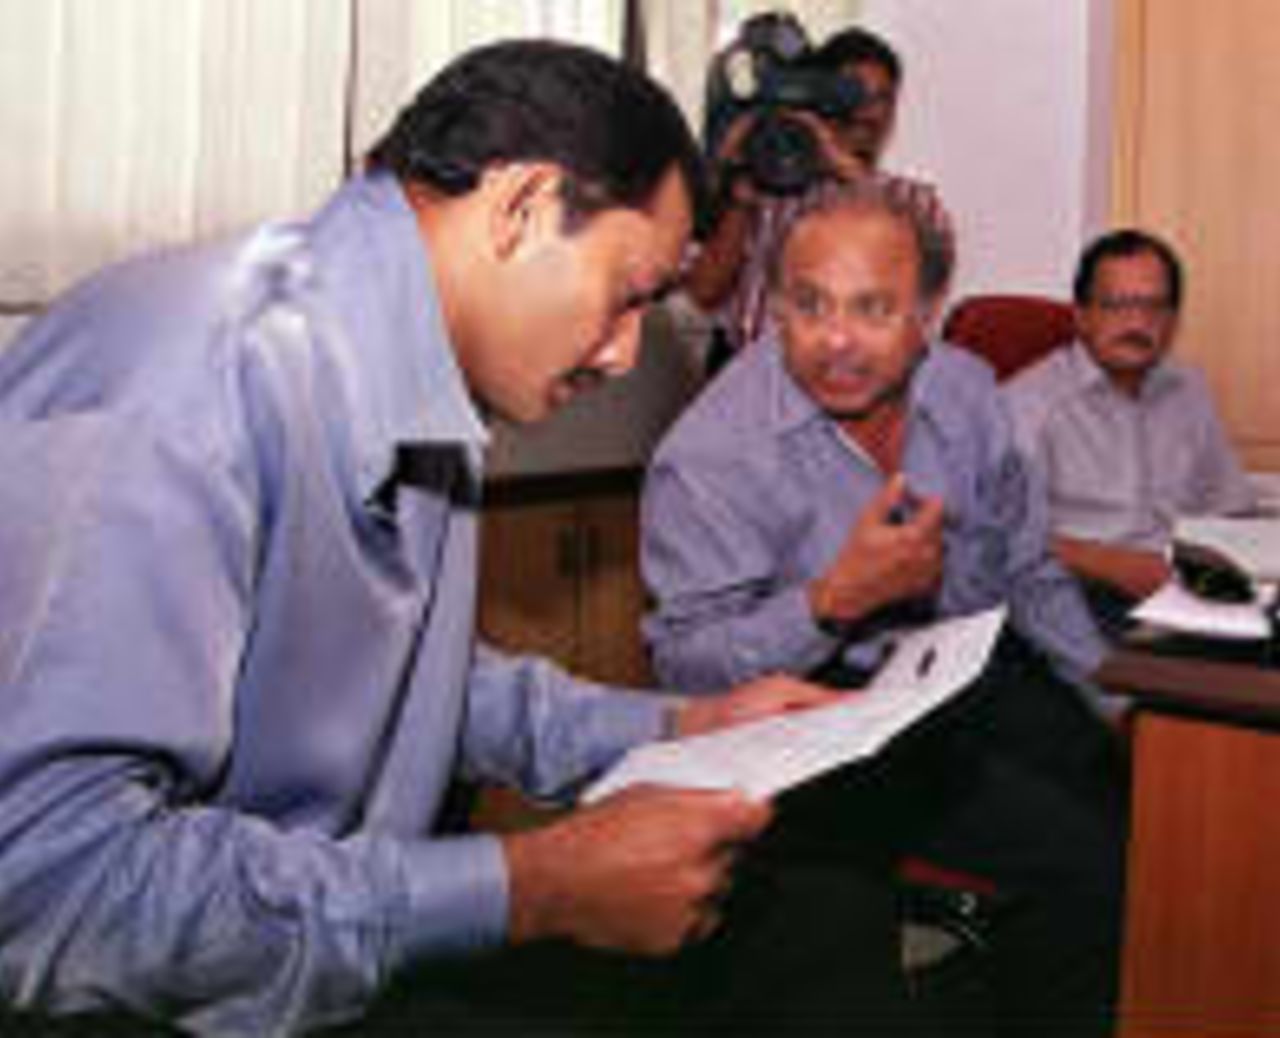 India cricket captain Mohammed Azharuddin (L) goes through the team list after the team was announced 17 November in Bombay for the forthcoming three Test series and five one-day internationals against New Zealand to be played in December and January, while Jaywant Lele (C), Secretary for the Board of Control for Cricket in India and Chairman Ajit Wadeker (R) look on.